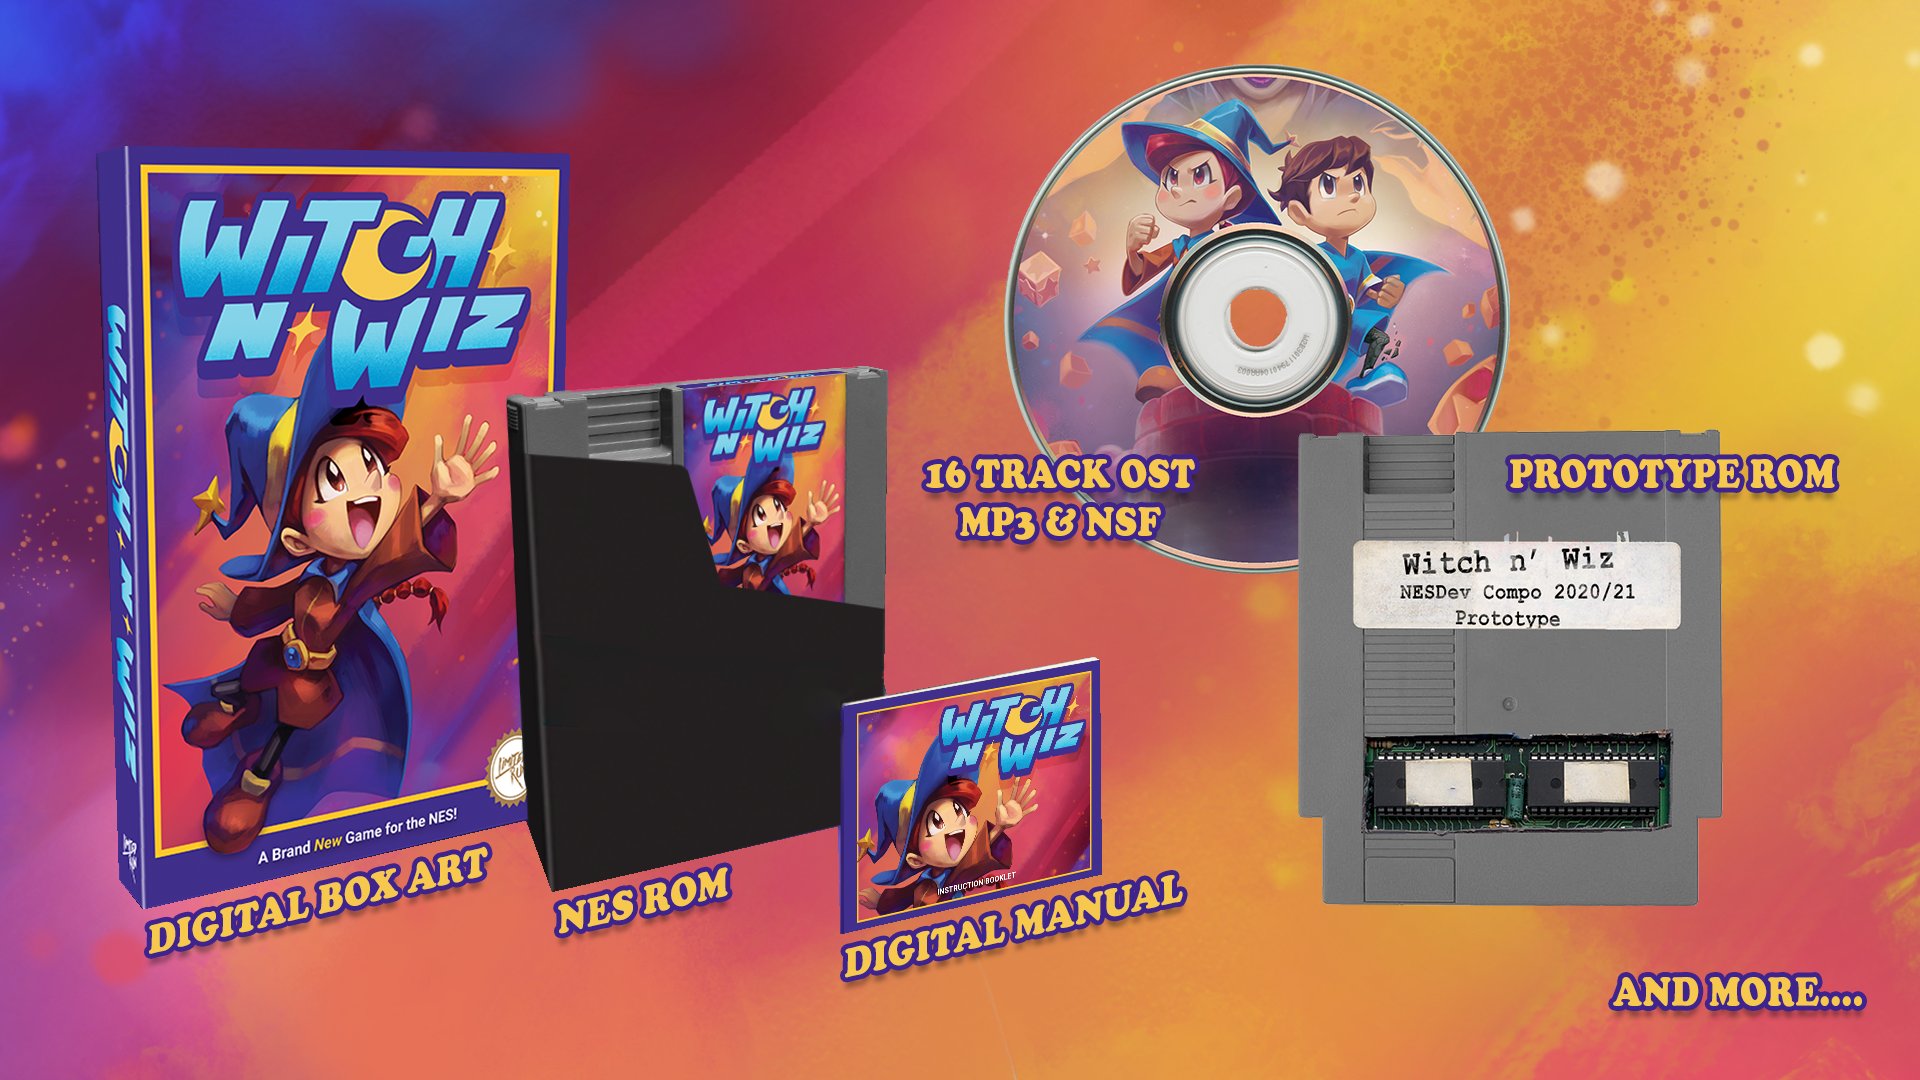 Marketing image shows Witch n' Wiz digital collection which includes: digital box art, nes rom, digital manual, original soundtrack in MP3 and NSF formats, a Prototype ROM, and more...